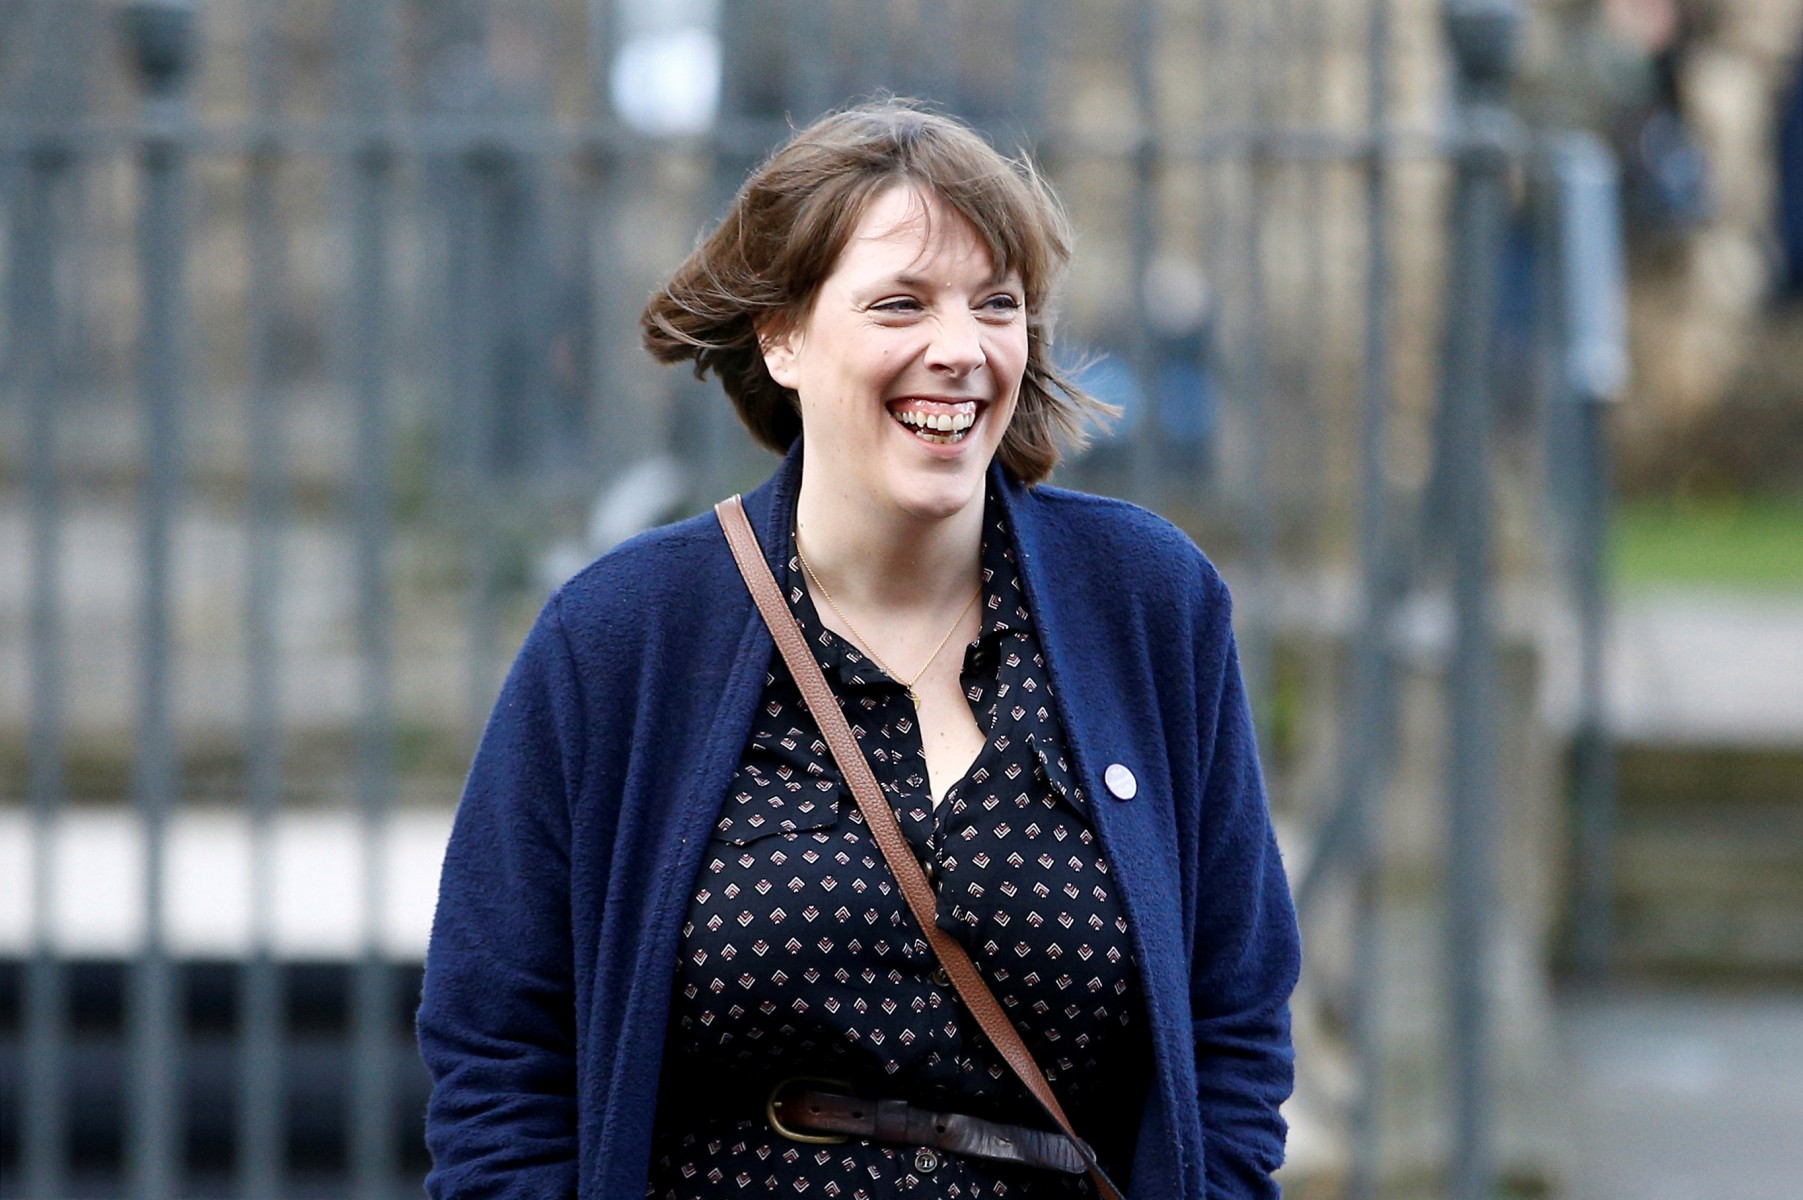 Jess Phillips is yet to announce she will stand to try and become the Labour Party leader